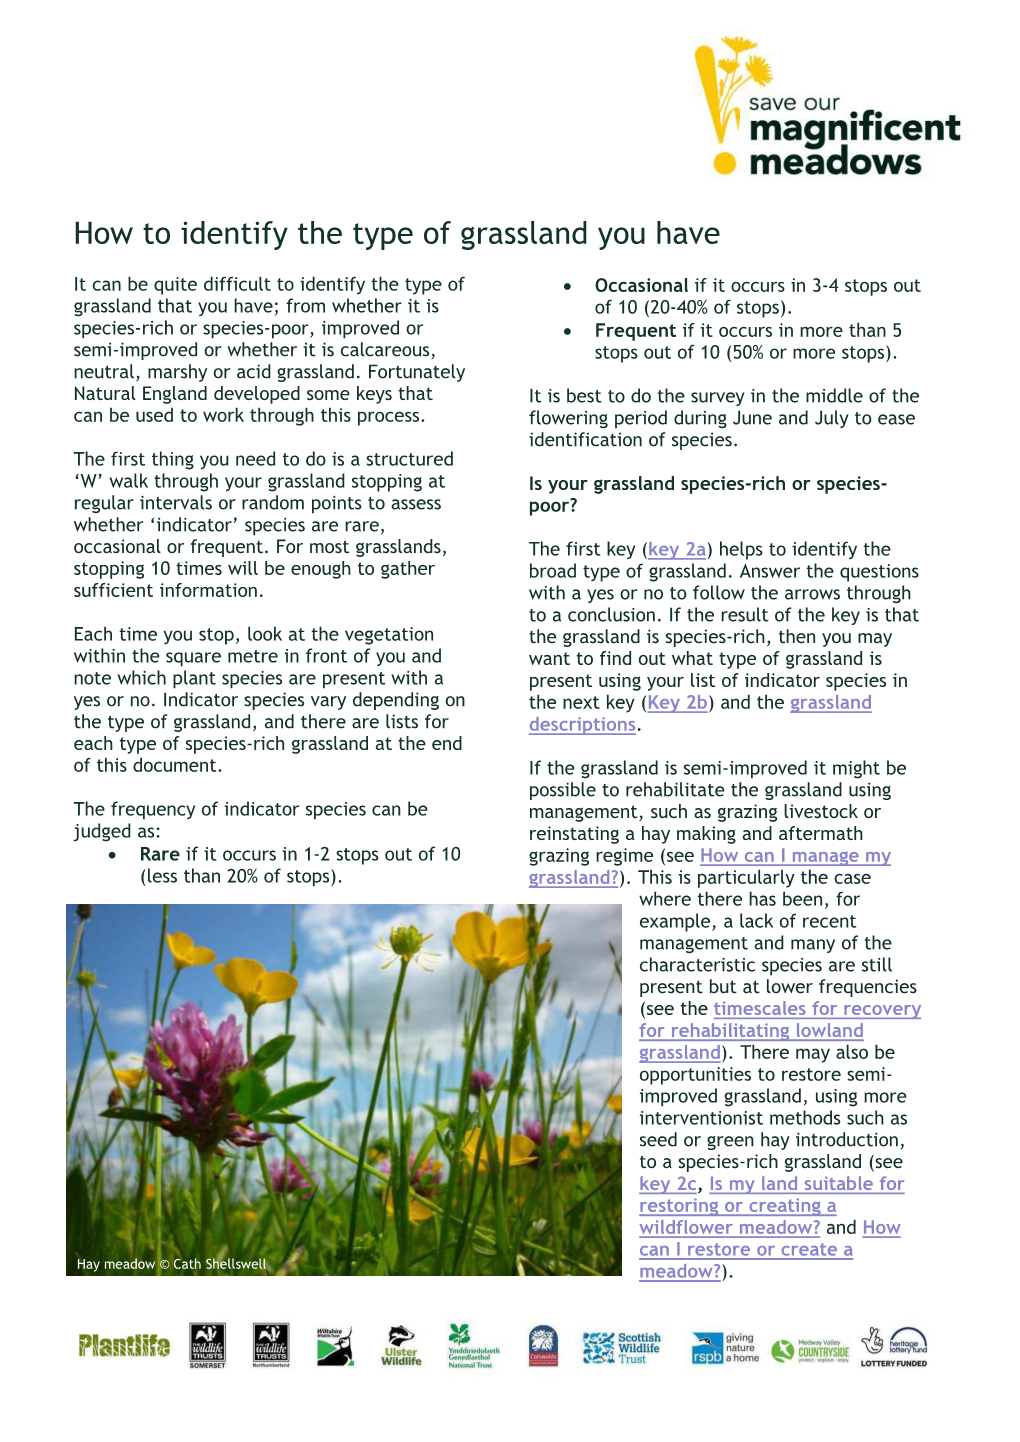 How to Identify the Type of Grassland You Have